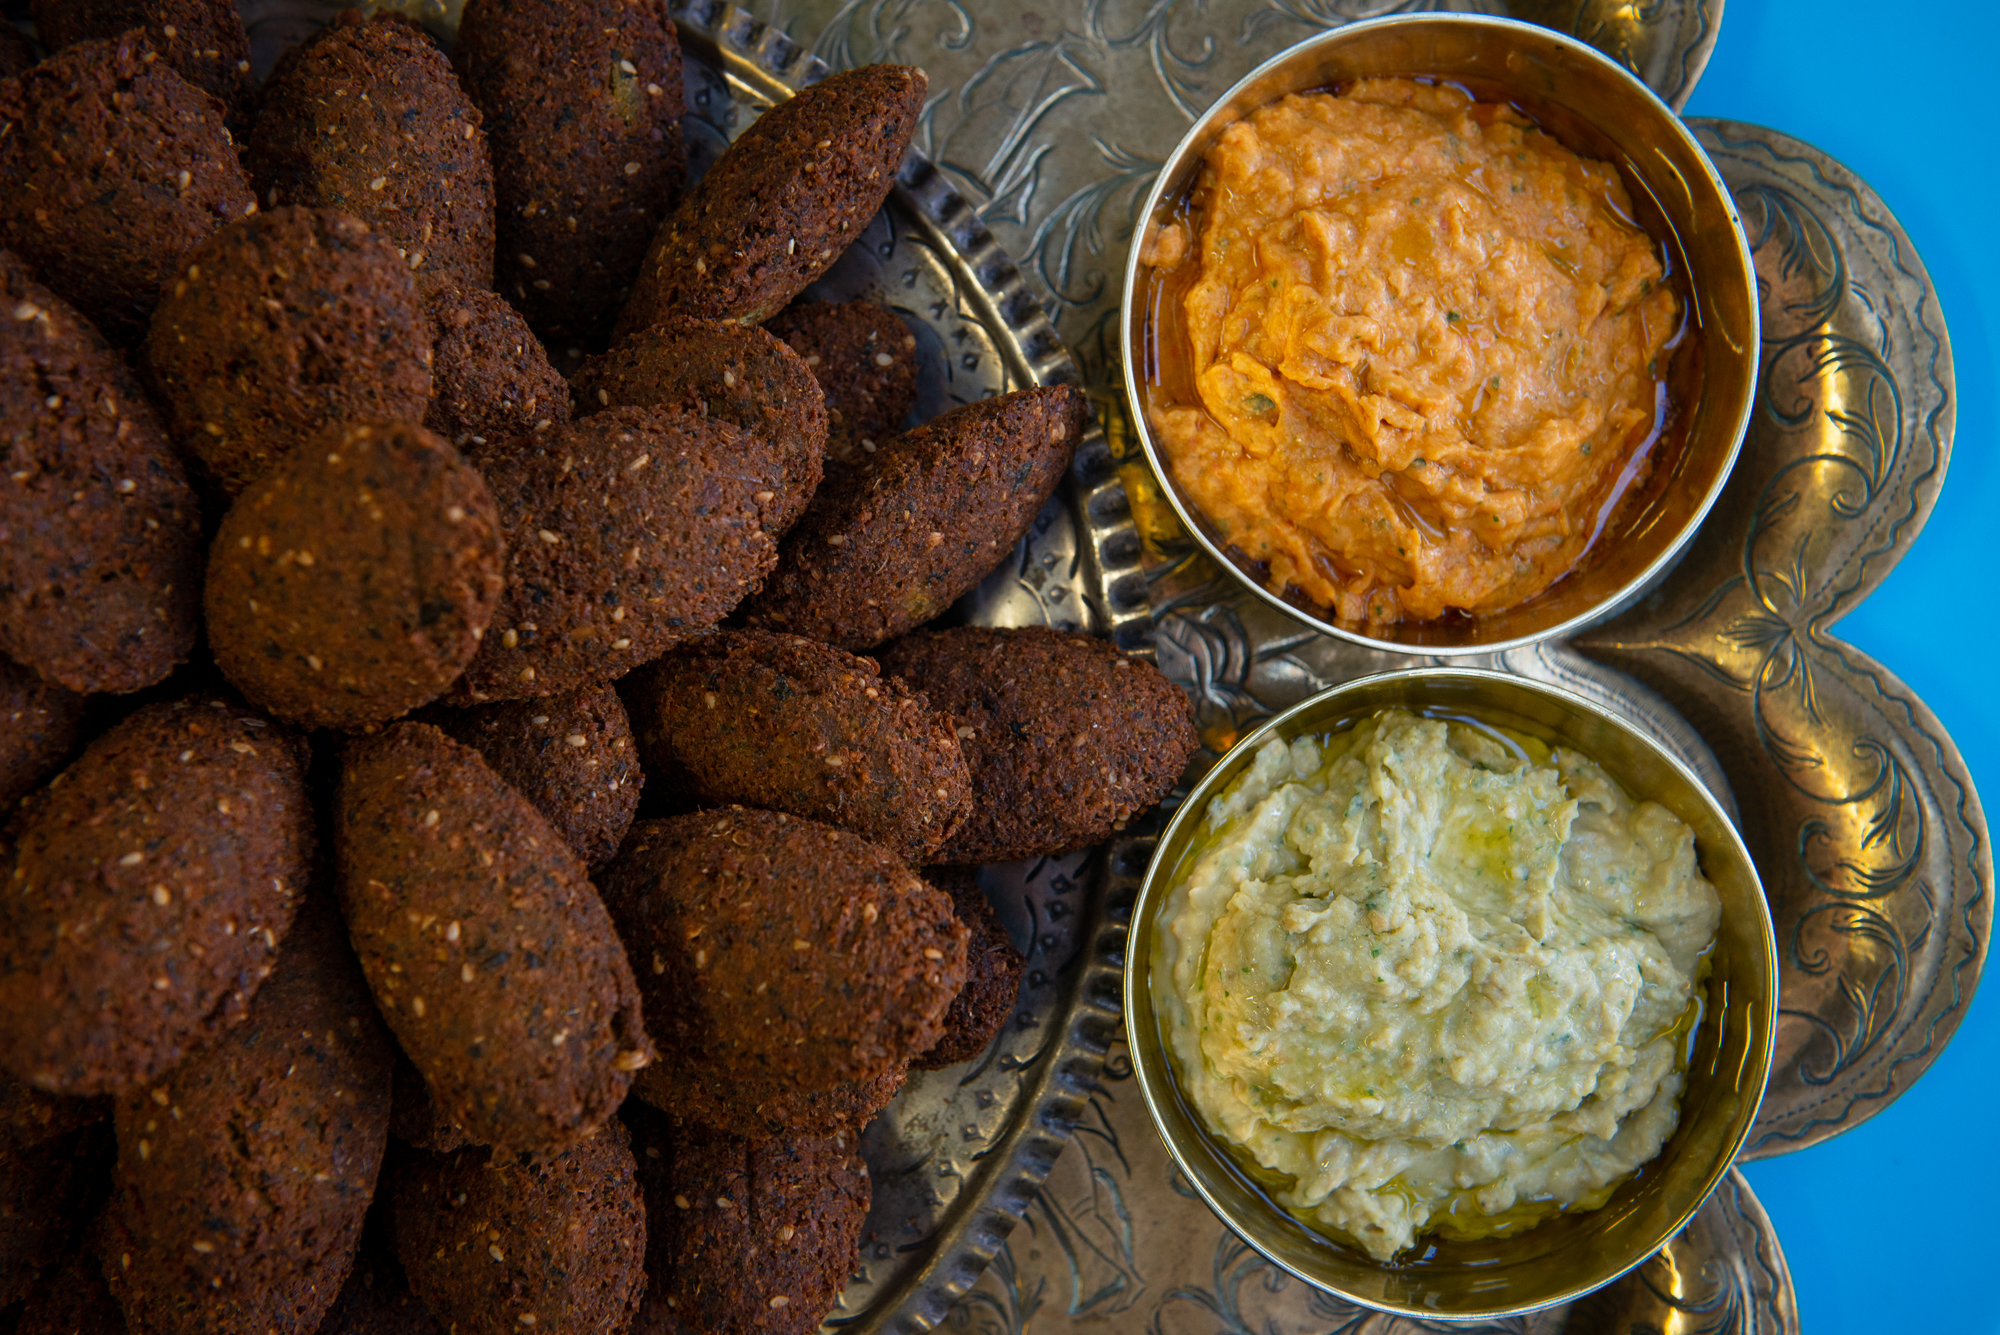 Falafel and houmous